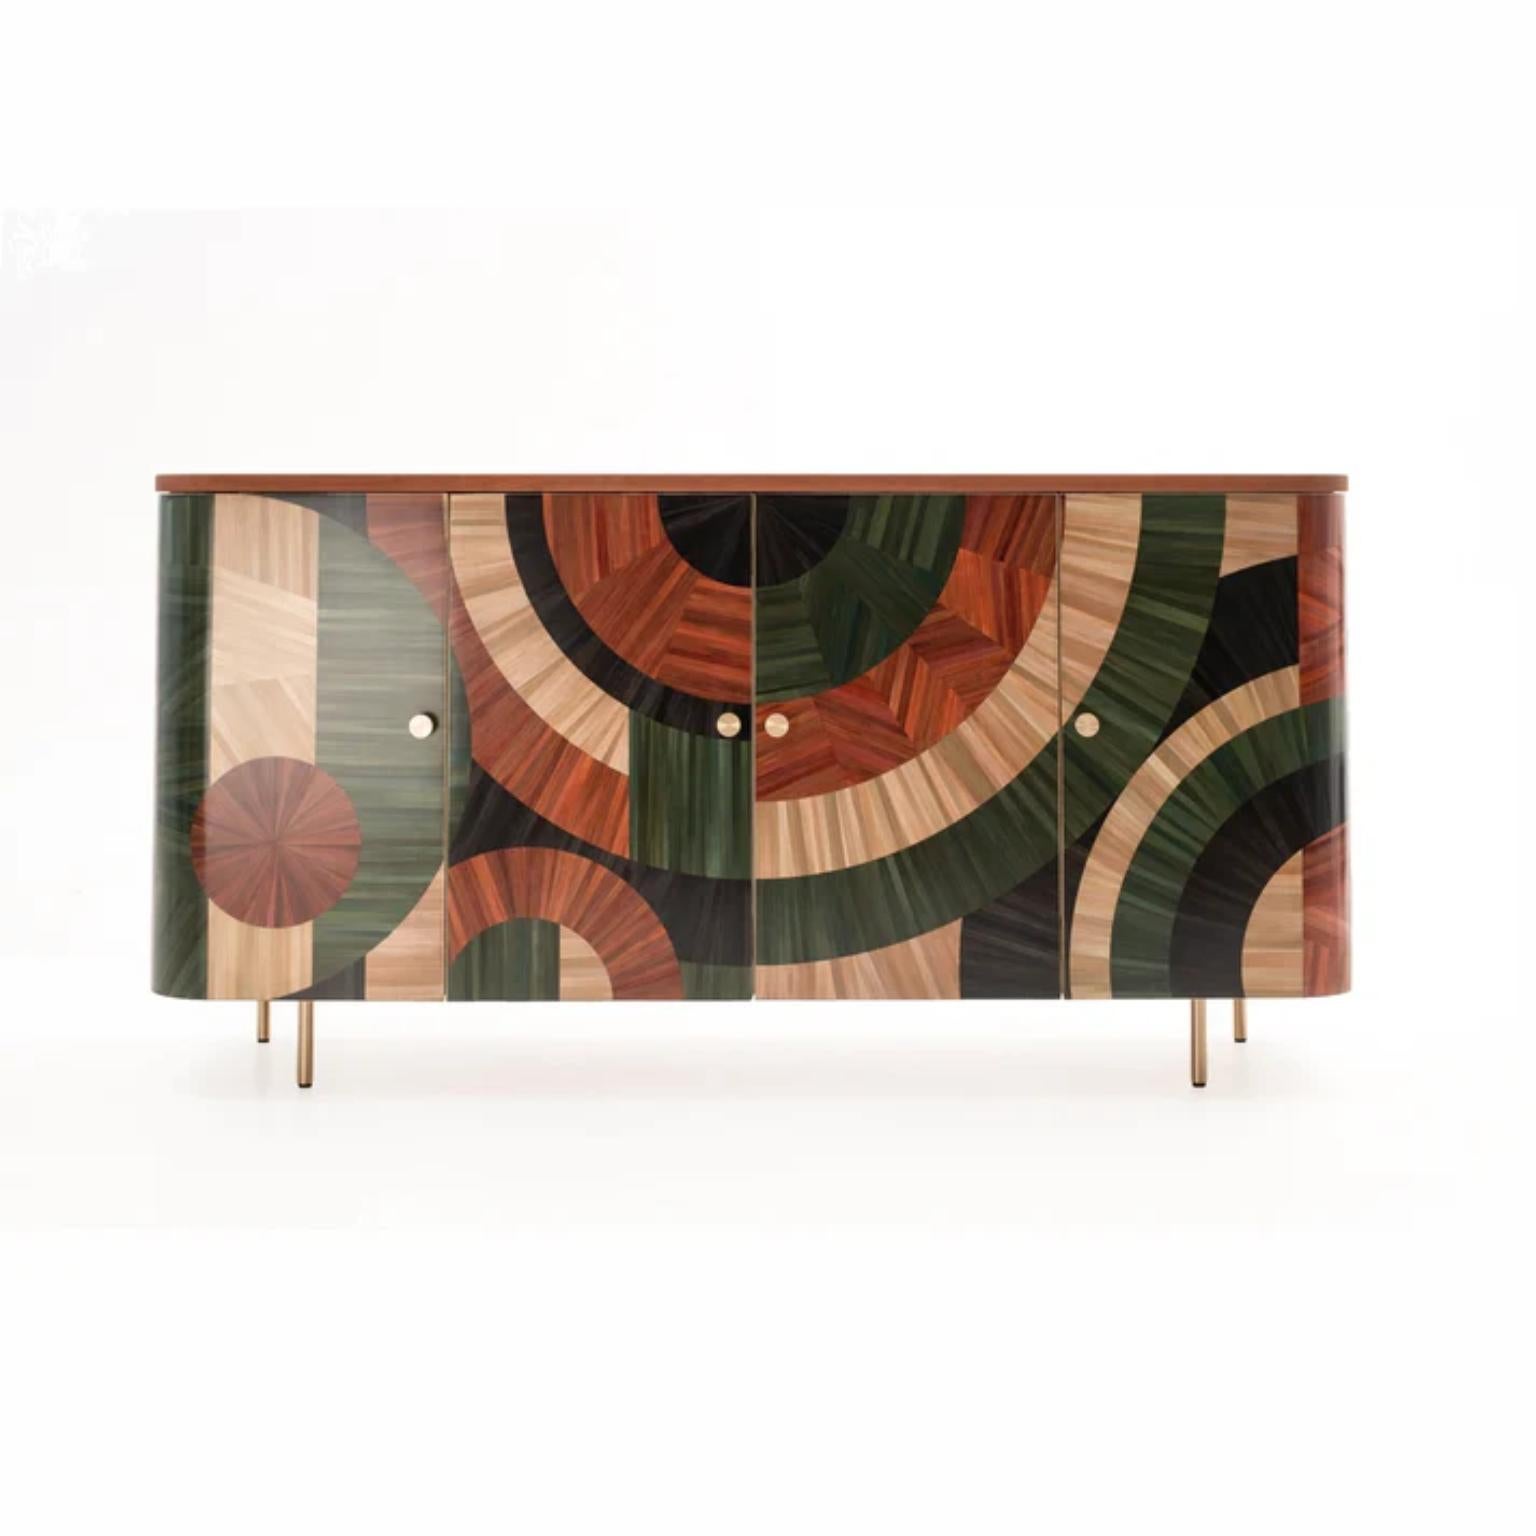 Solomia 4 Cabinet by Ruda Studio
Dimensions: D 45 x W 170 x H 75 cm.
Materials: Solid wood (ash), rye straw inlay, plywood, glass and brass.
Weight: 70 kg.

Dimensions are customizable. Please contact us. 

Inspired by the wealth of Ukrainian land,